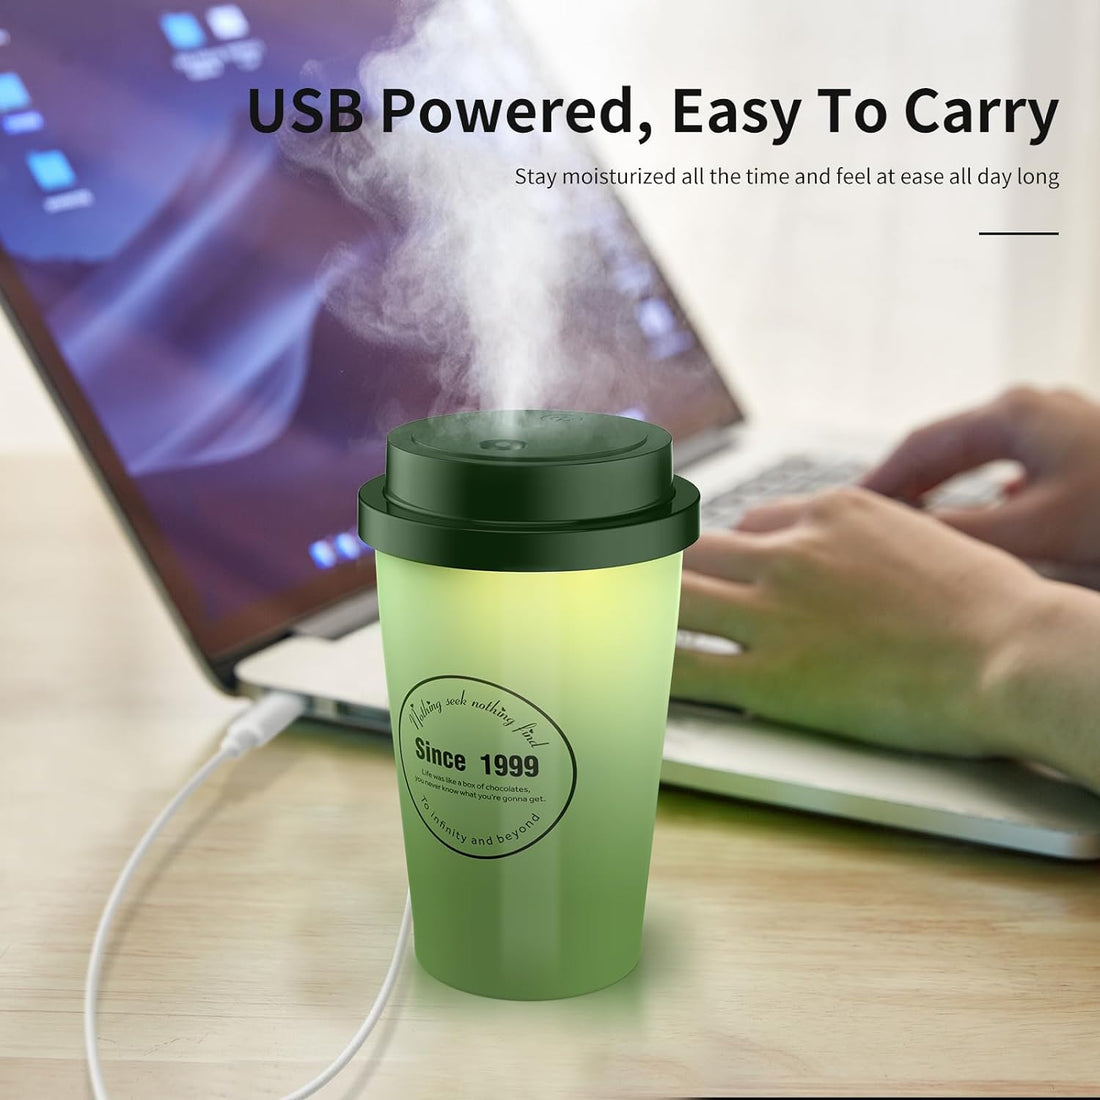 Bestmoument Portable Small Humidifier, 270 Ml Mini Cool Mist Humidifier With Night Light, USB Personal Humidifier Automatic Shutdown, Ultra-quiet, Suitable For Home Office Travel (Green)